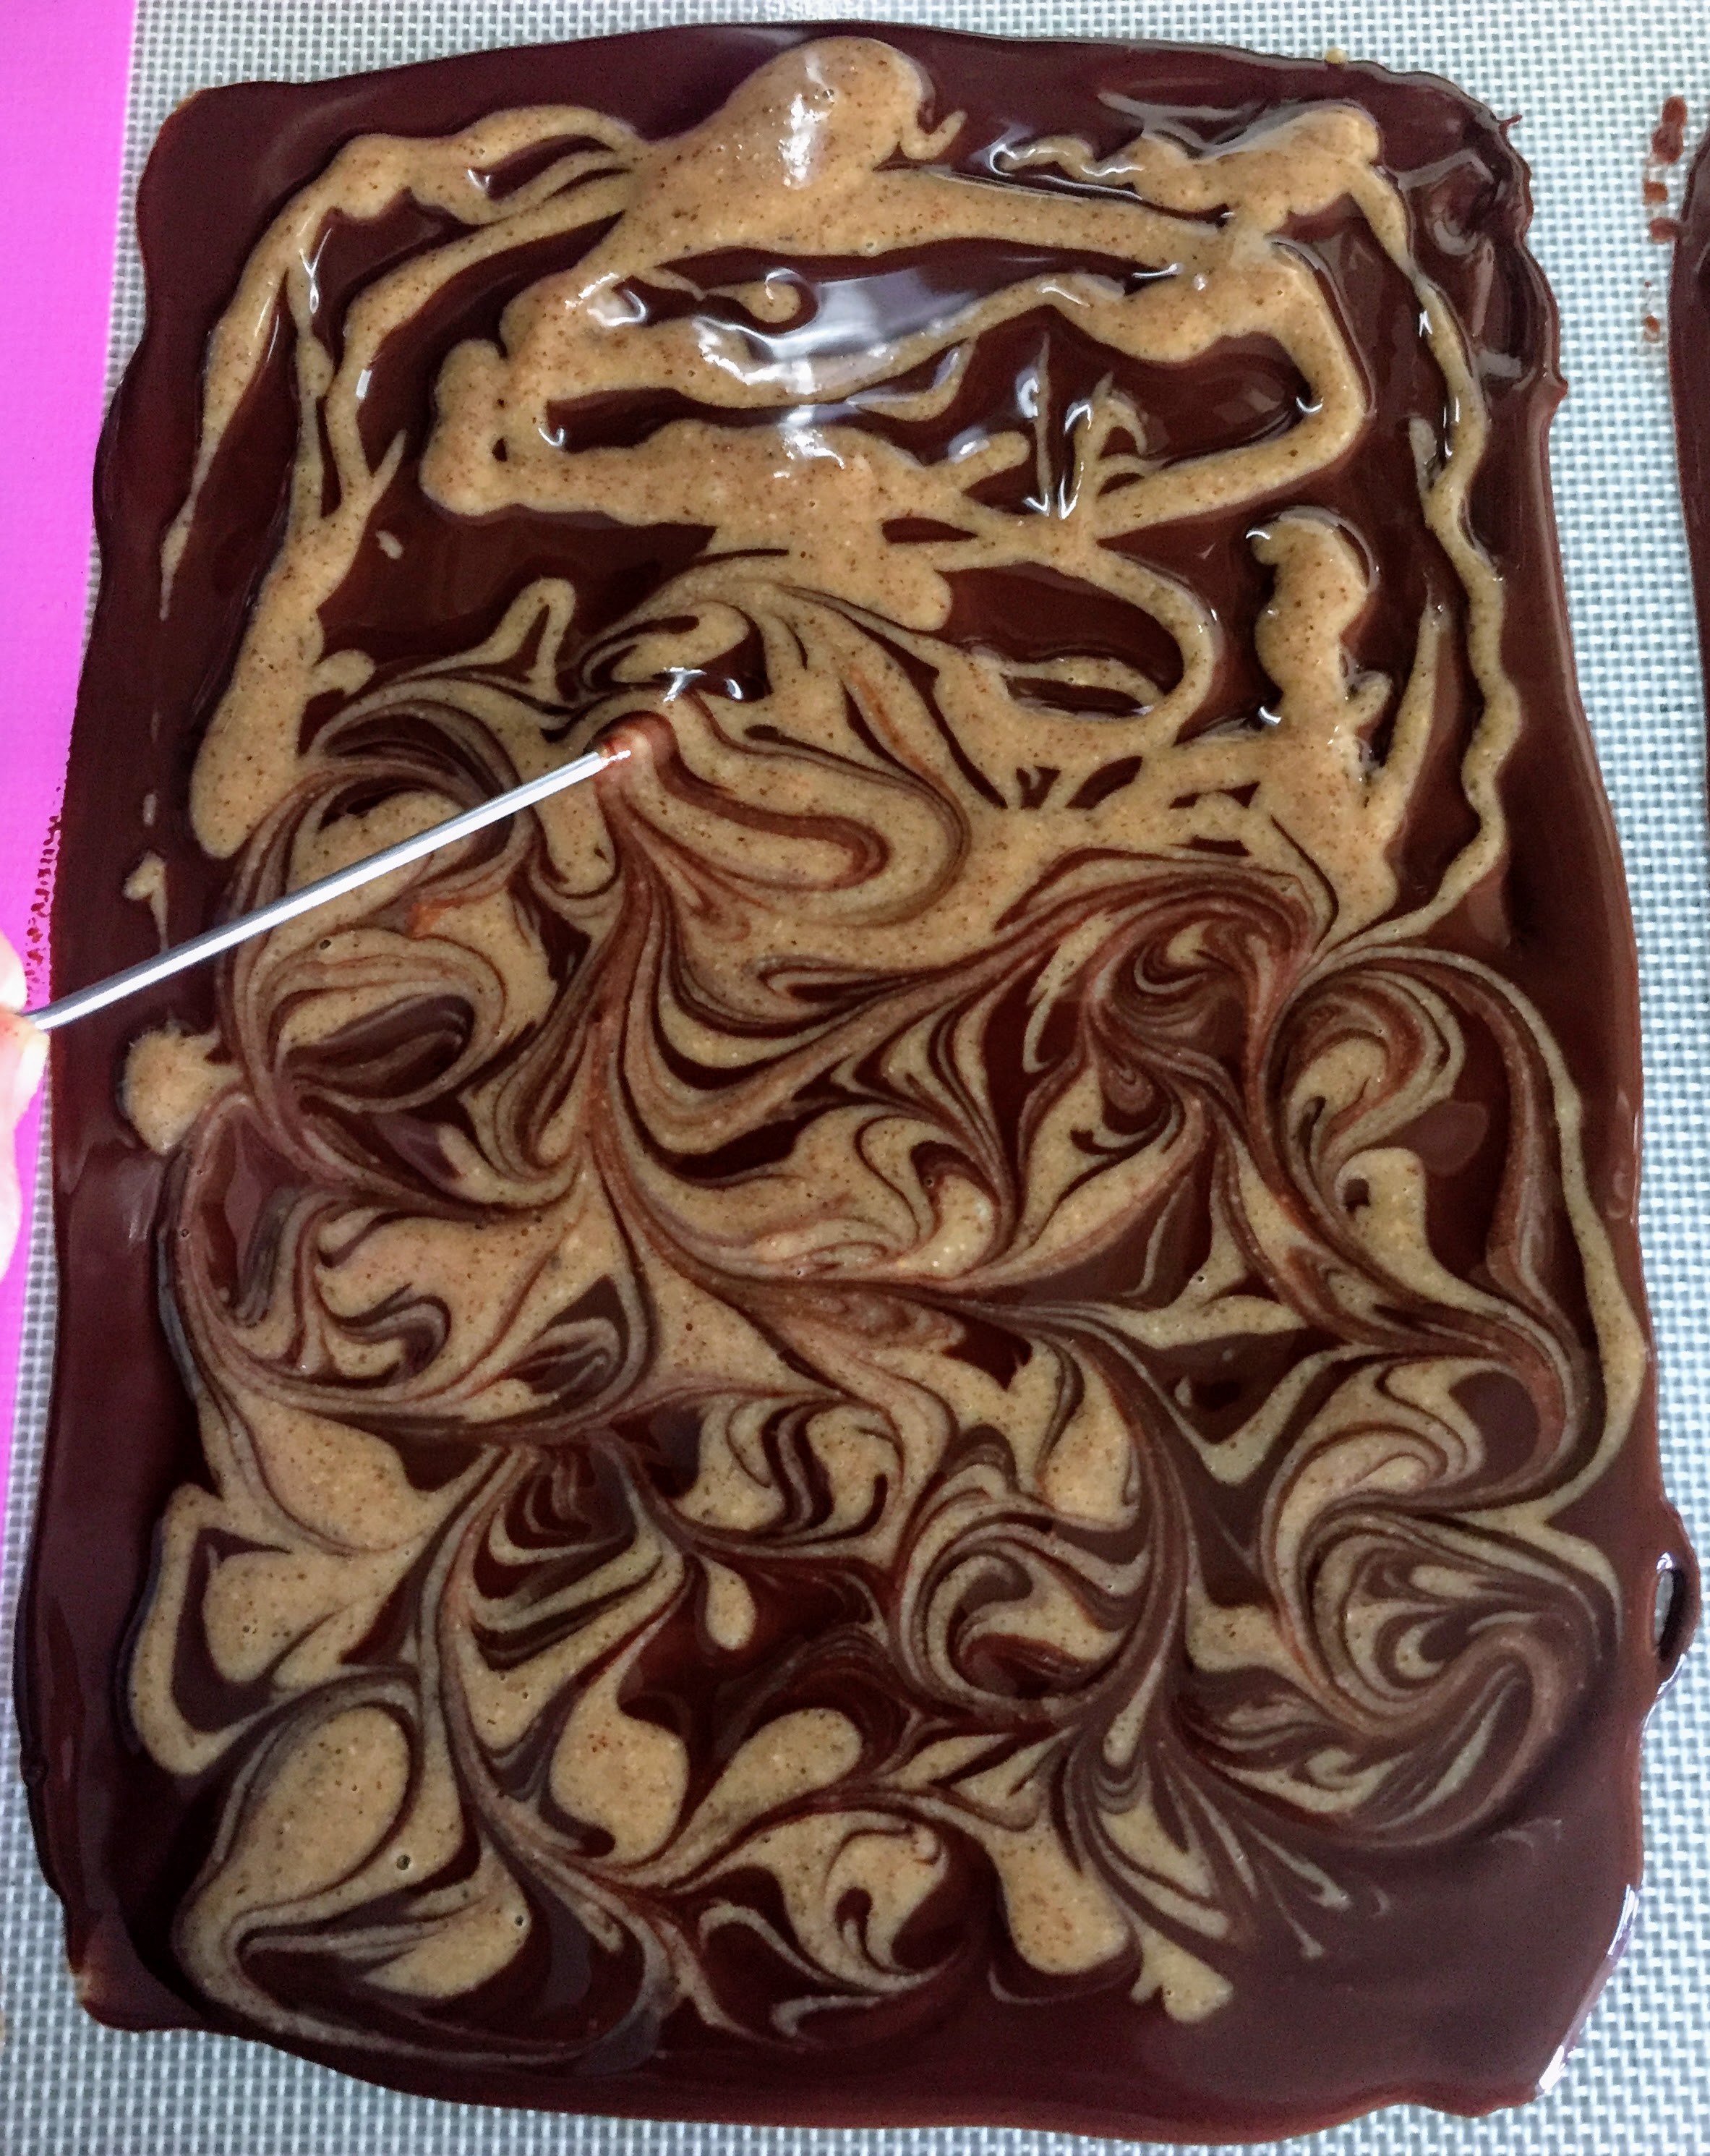 A rectangle of melted dark chocolate, spread on a baking tray and drizzled with almond butter mixture. The top half shows the almond butter roughly drizzled, and the bottom half shows the marbled effect when a skewer is run through the chocolate and almond mixture.